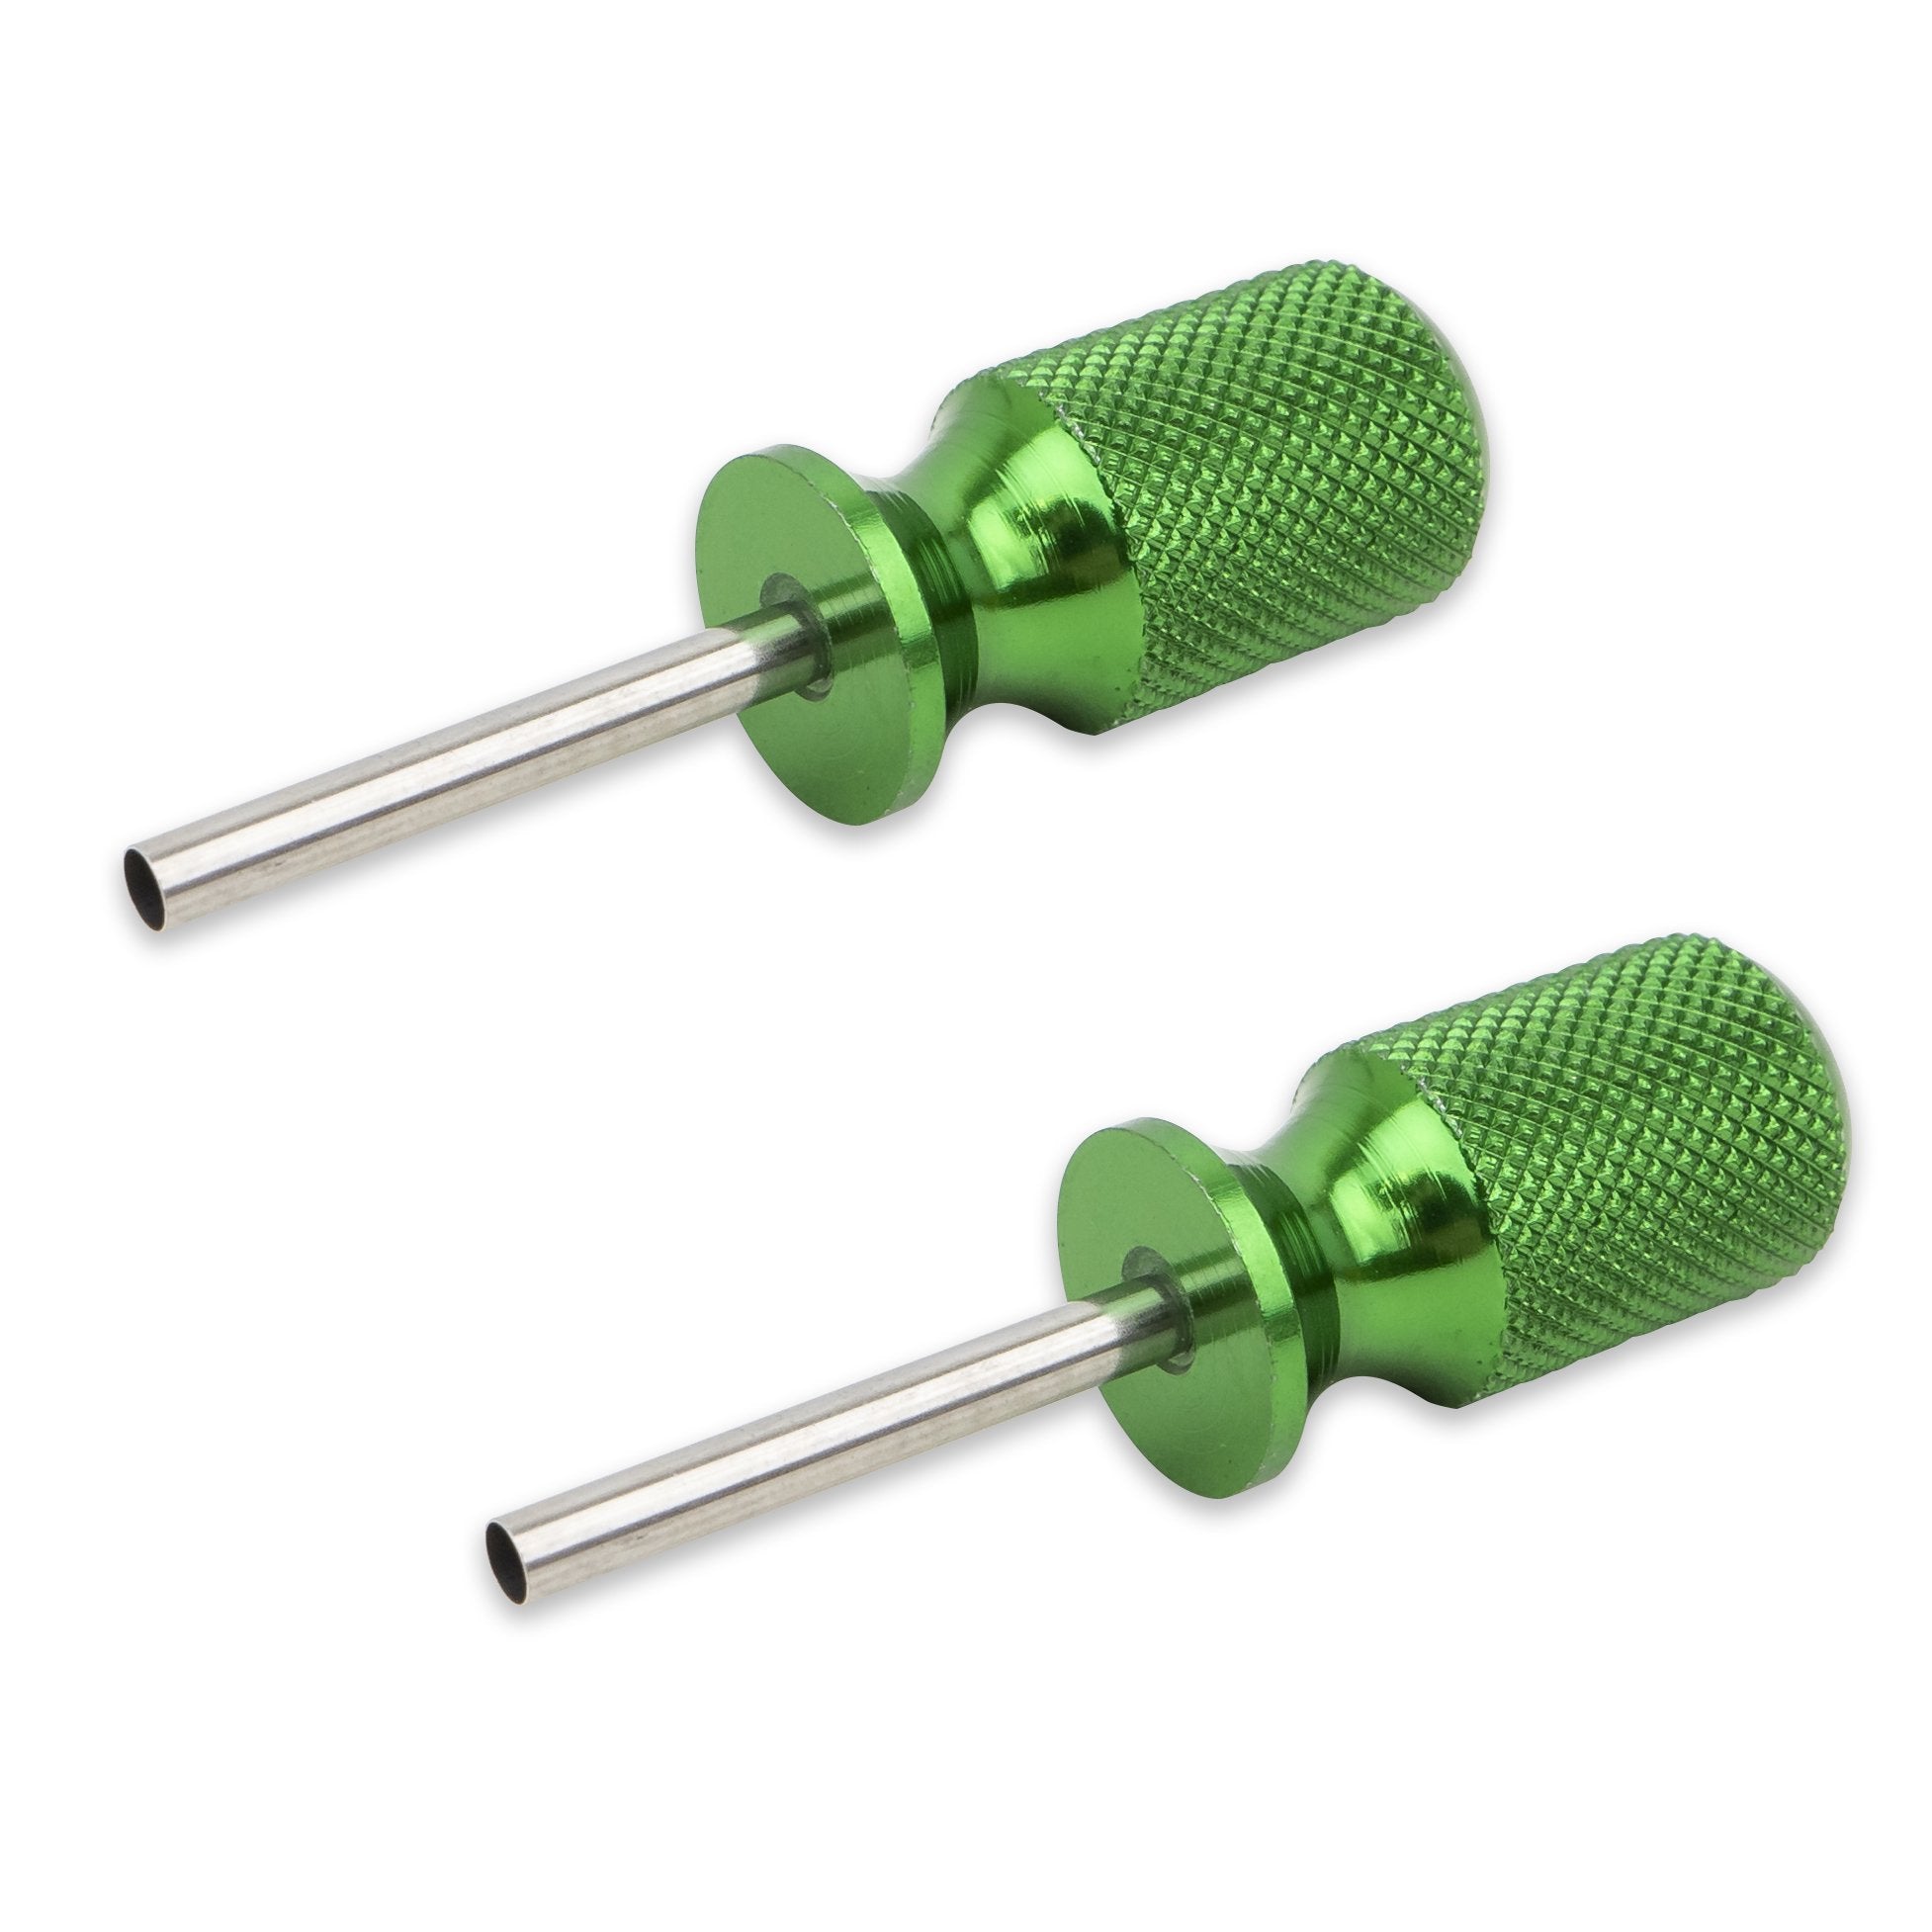 Delphi Weather Pack Connector Terminal Removal Tool - Release Connectors Safely (2 Pack)